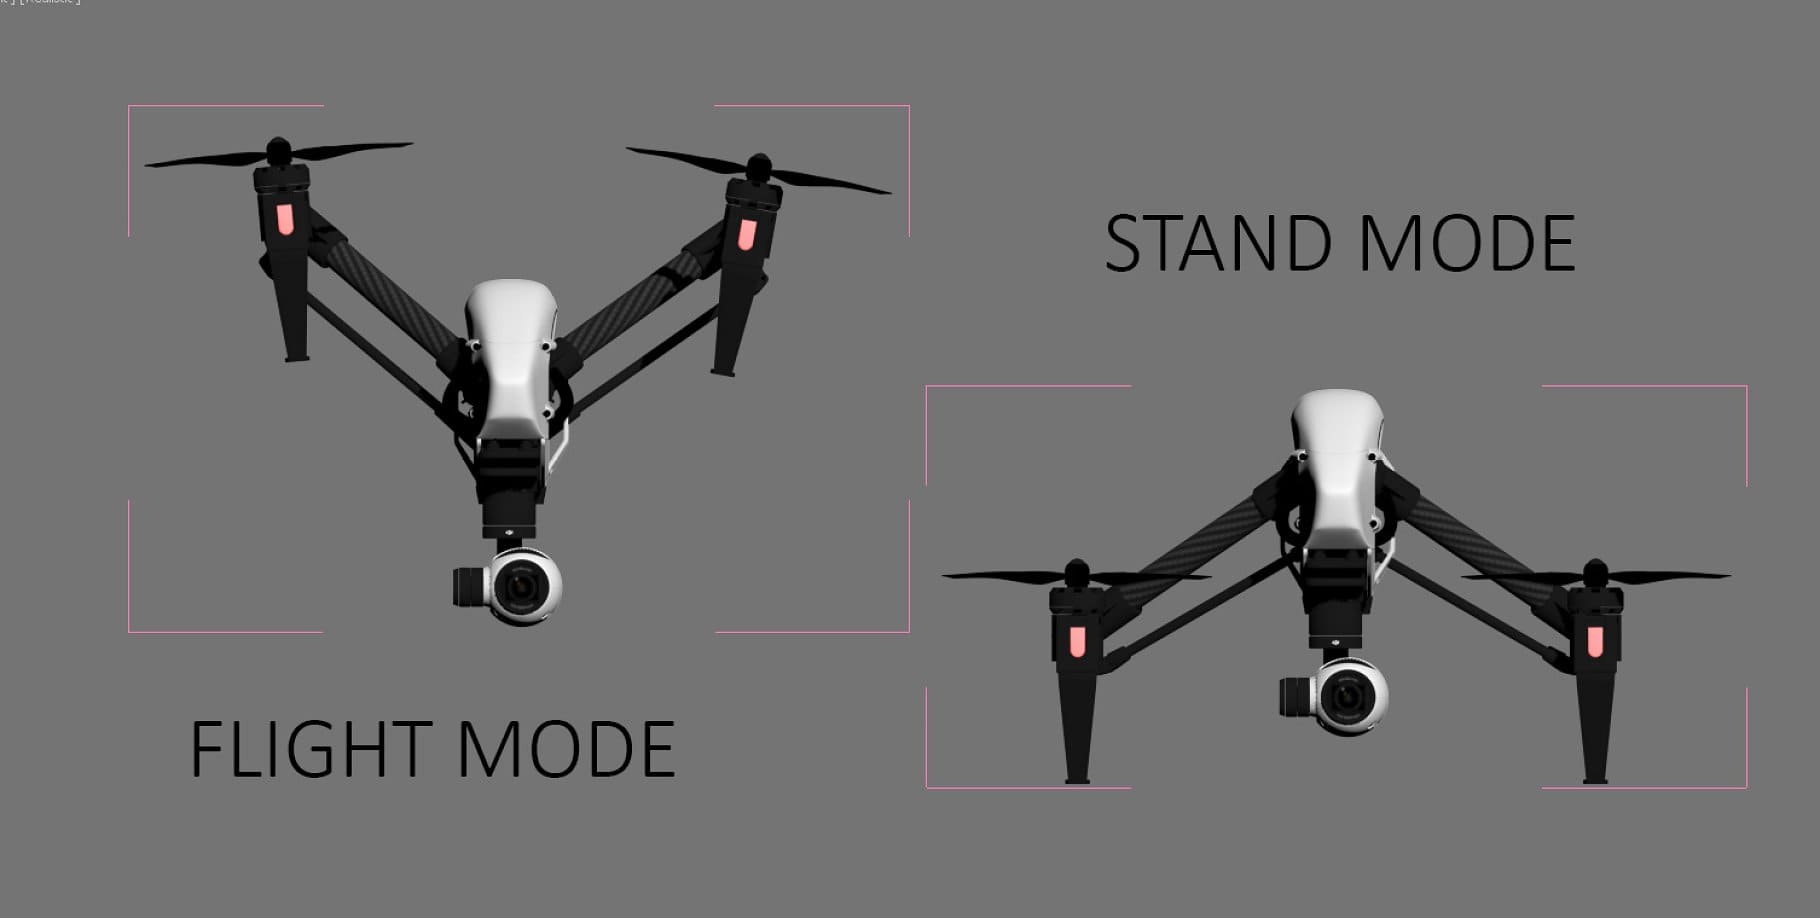 Flight mode and stand mode quadcopters.